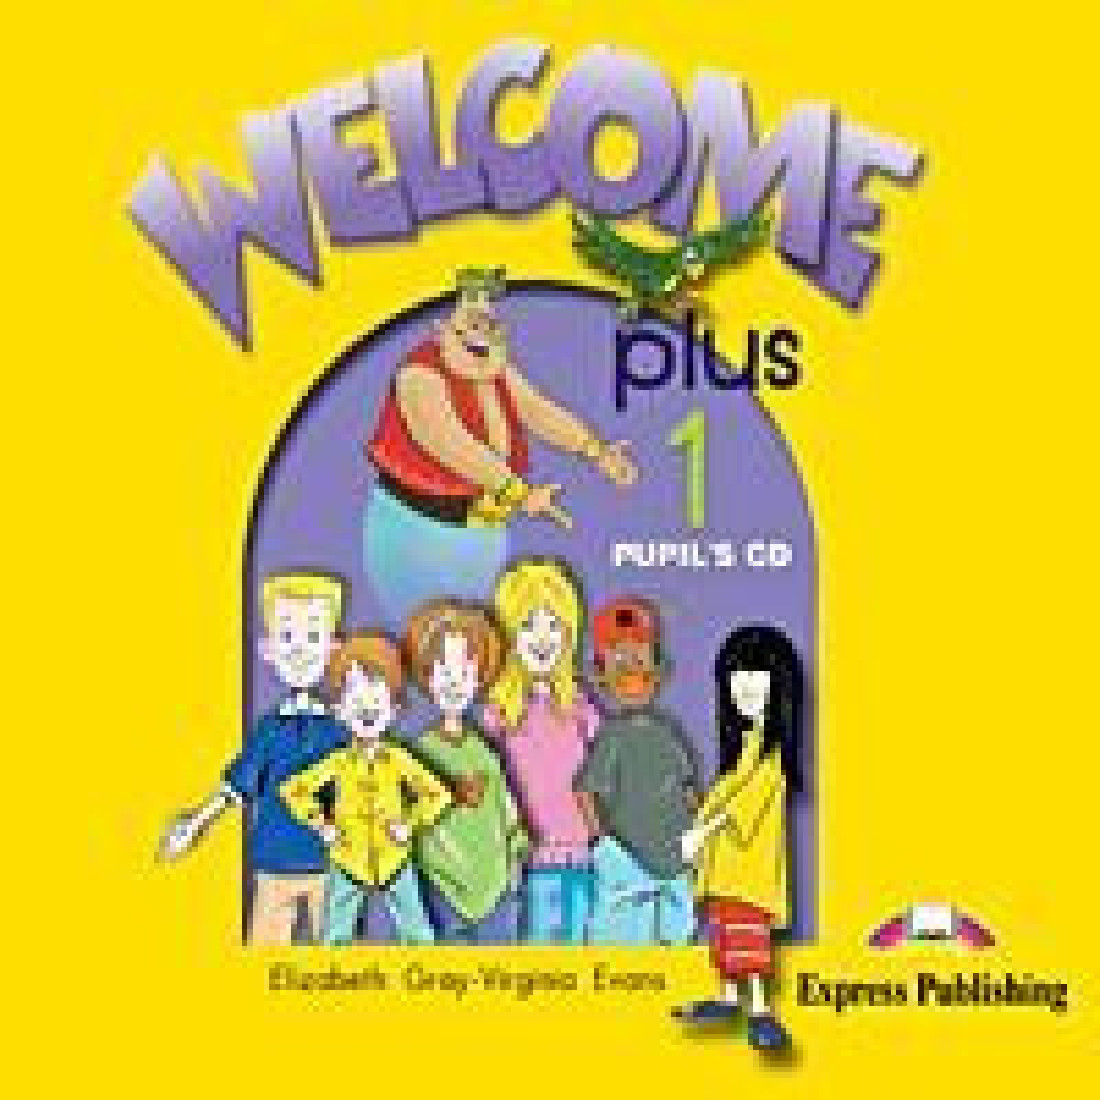 WELCOME PLUS 1 PUPILS CD